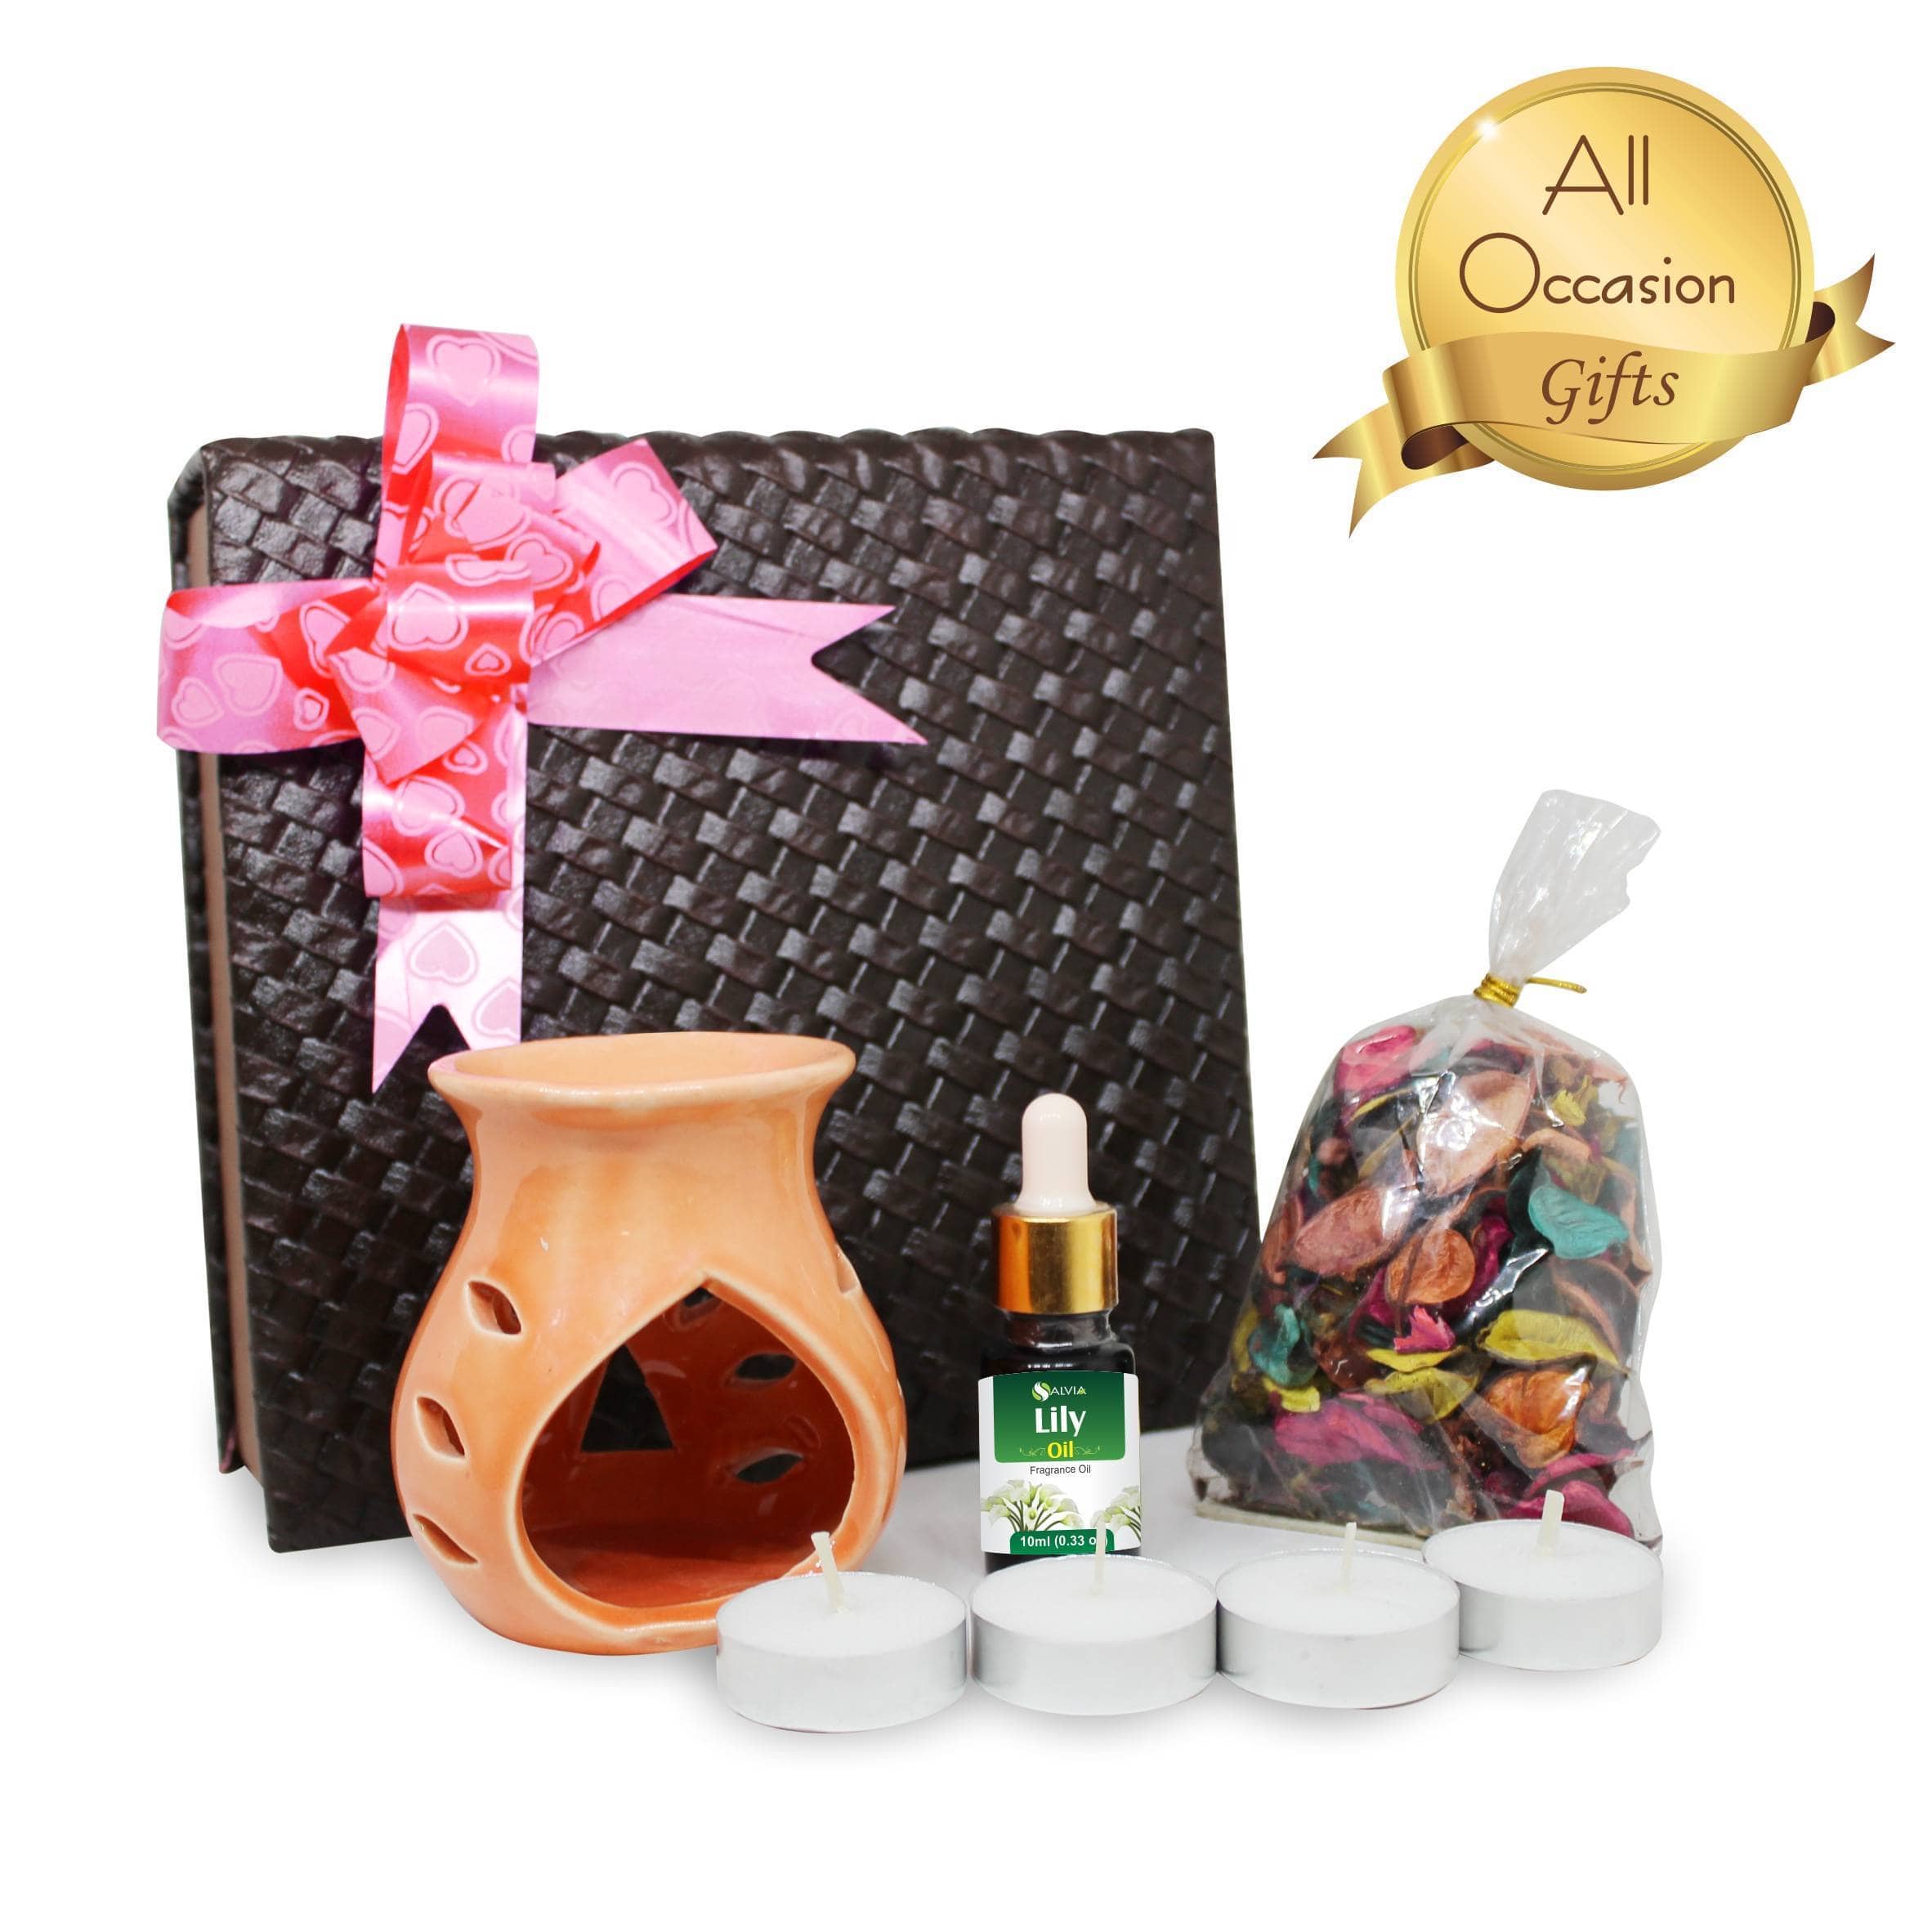 Salvia Gifts,Aromatherapy Combo Lily Oil with Ceramic Diffuser Gift Combo